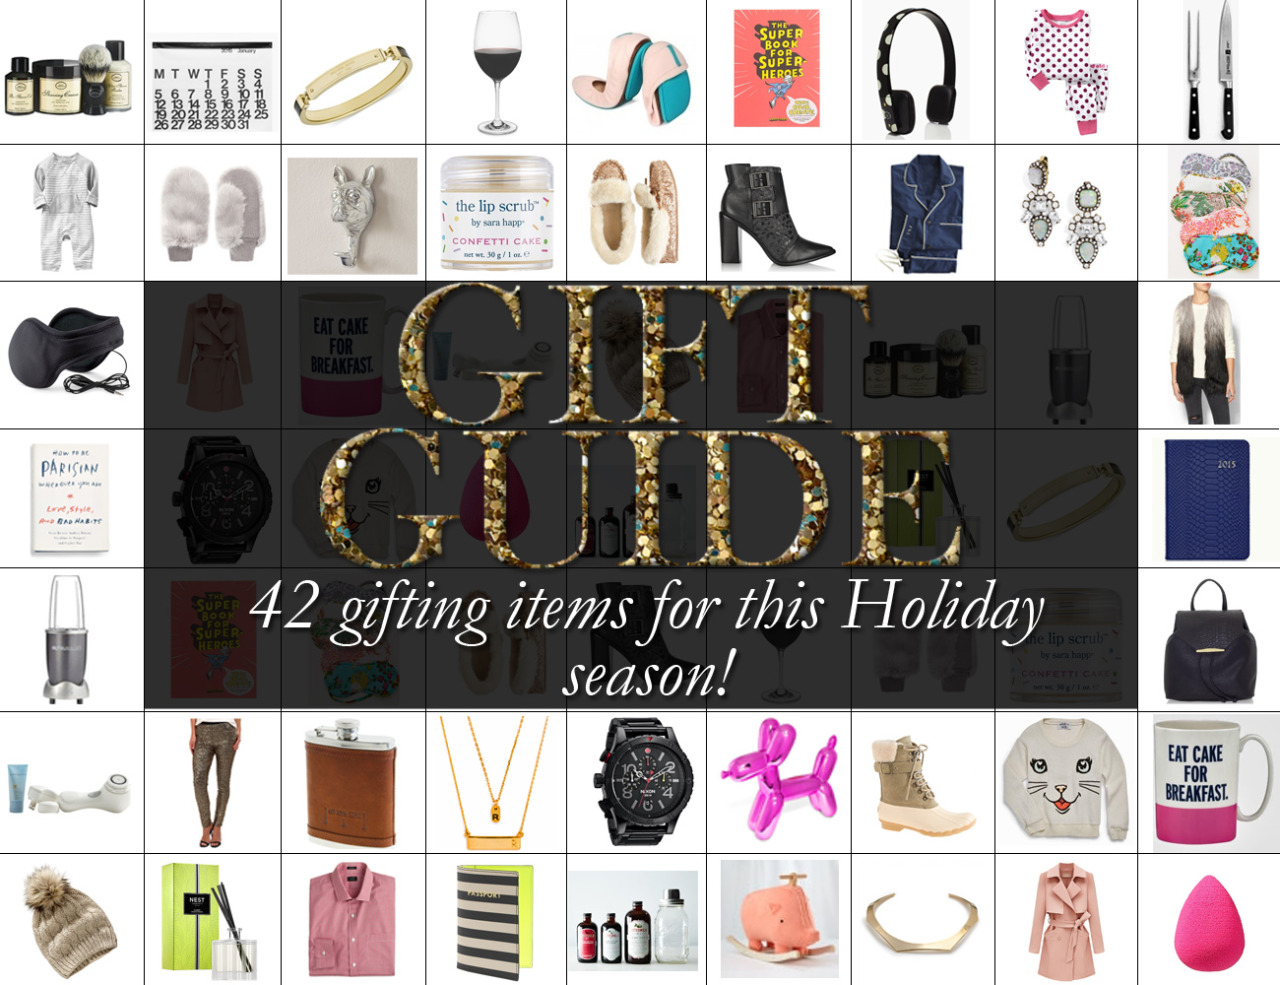 Gift Guide: 42 Gifting items for this Holiday season!